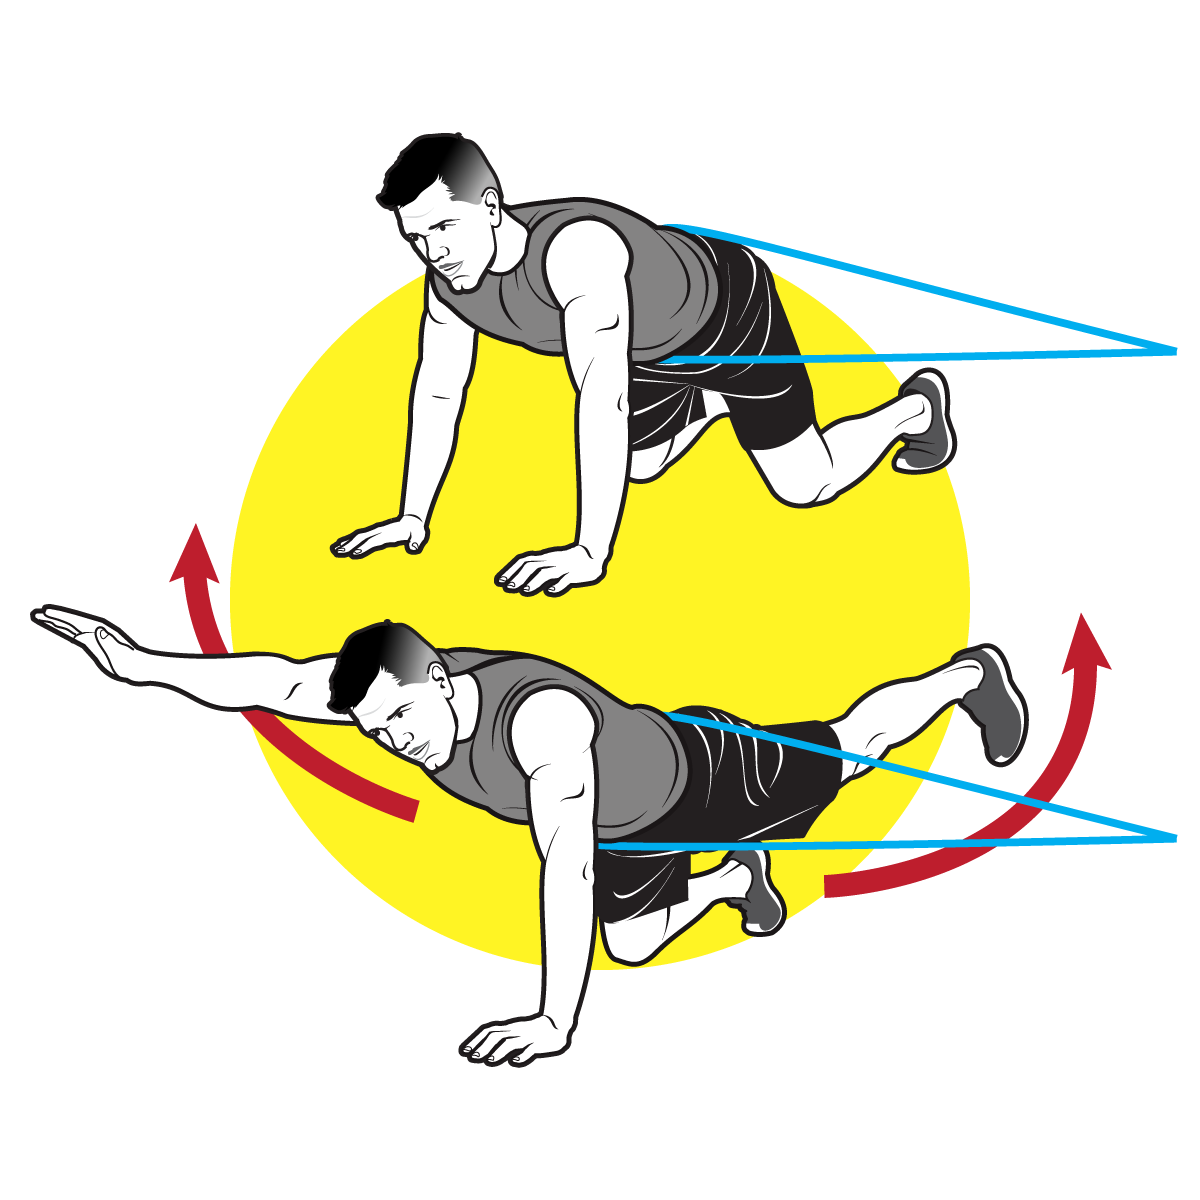 Try Tom Brady's Full Body Workout With Exercise Bands